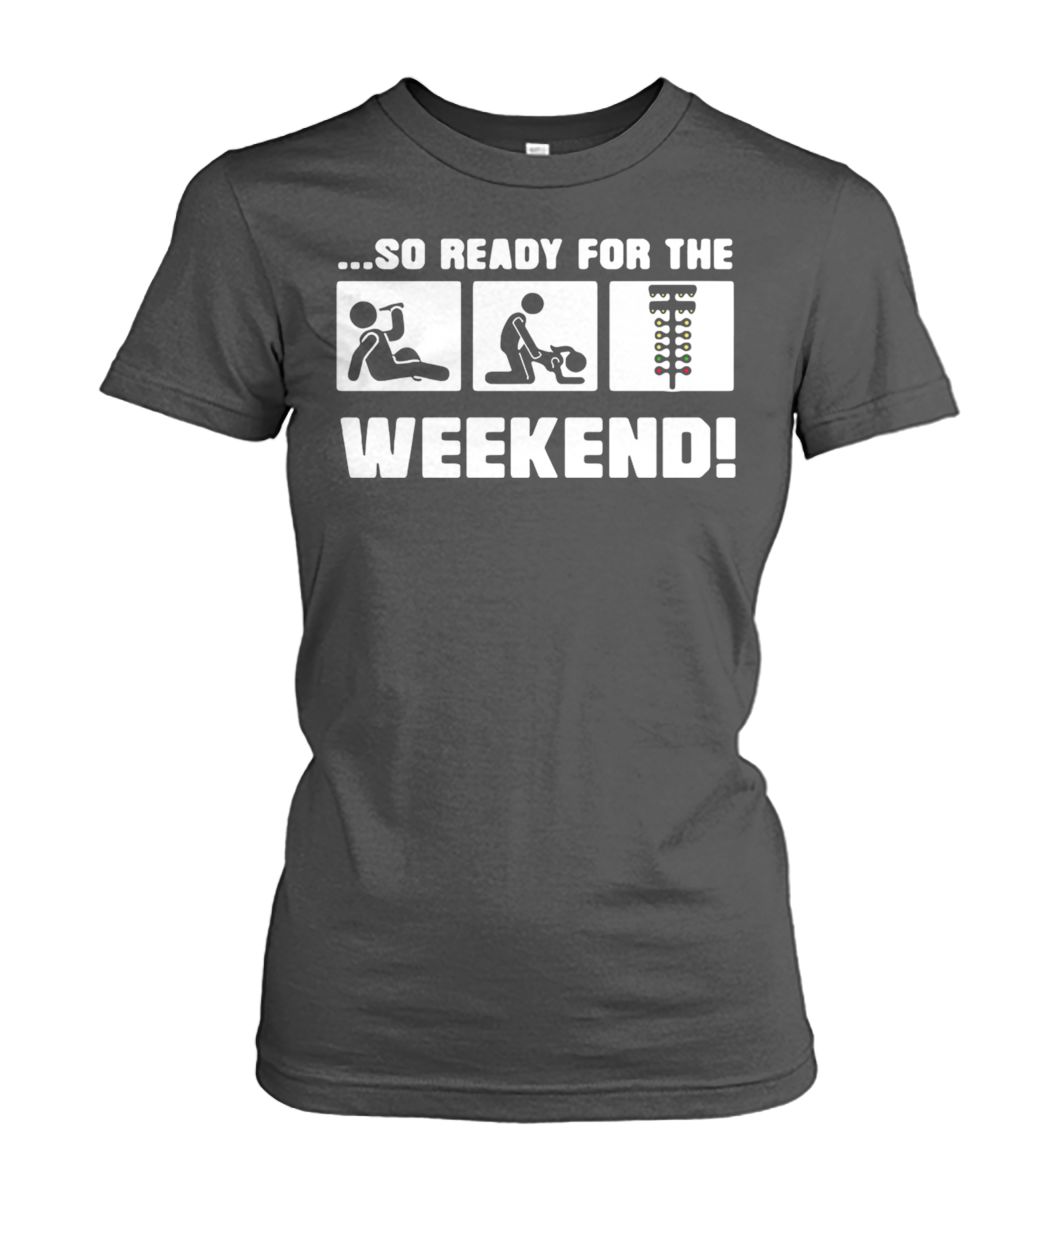 Drinking sex and drag racing so ready for the weekend women's crew tee